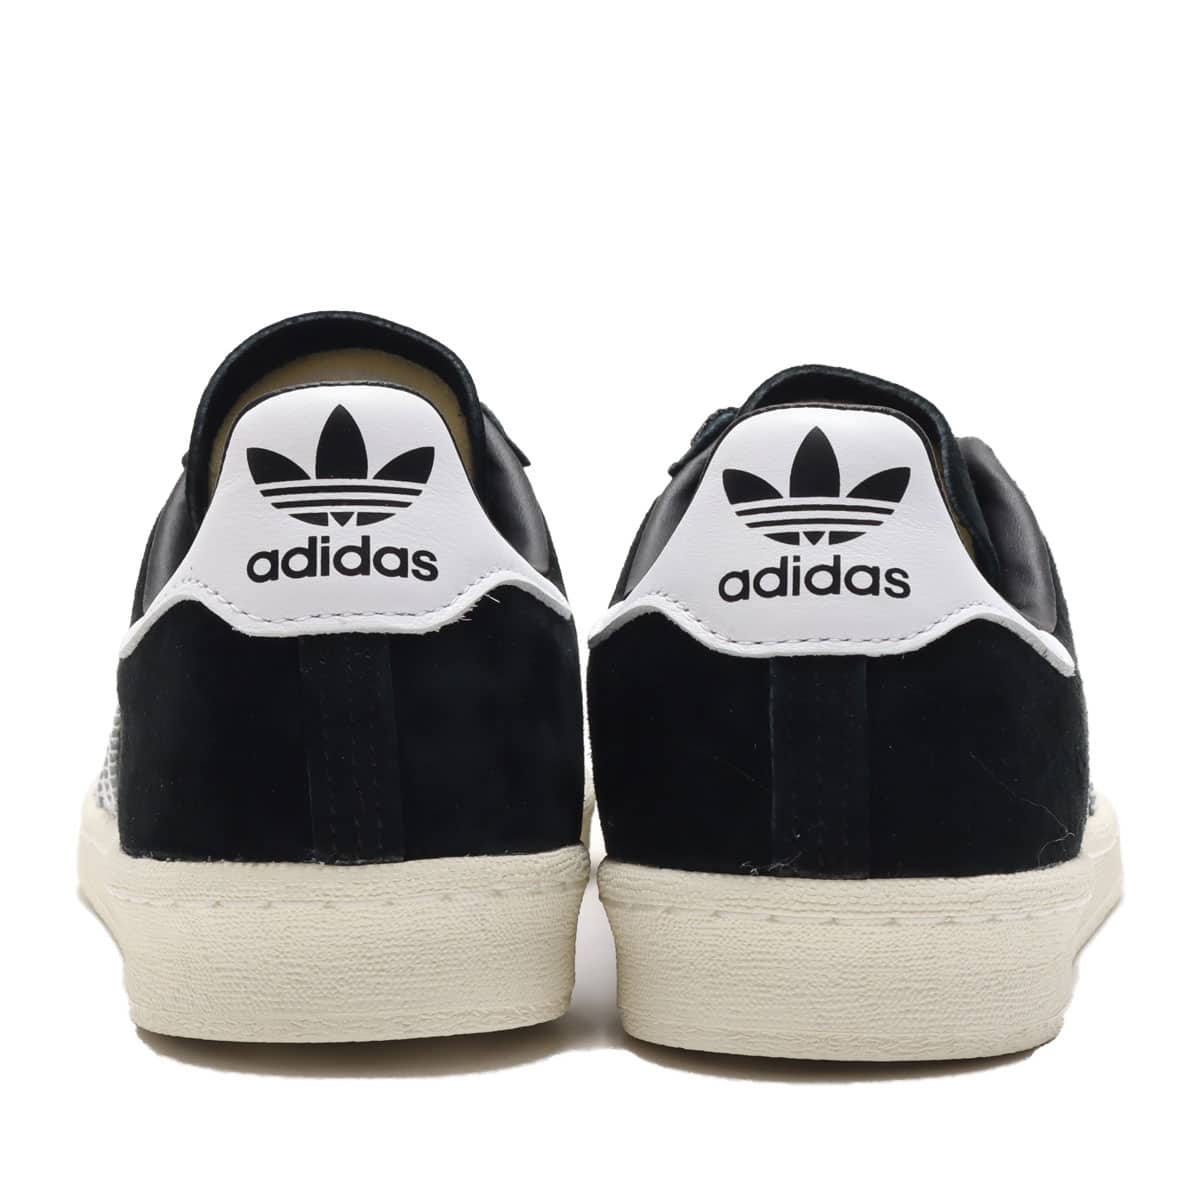 adidas CAMPUS 80s CORE BLACK/FOOTWEAR WHITE/OFF WHITE 21SS-I